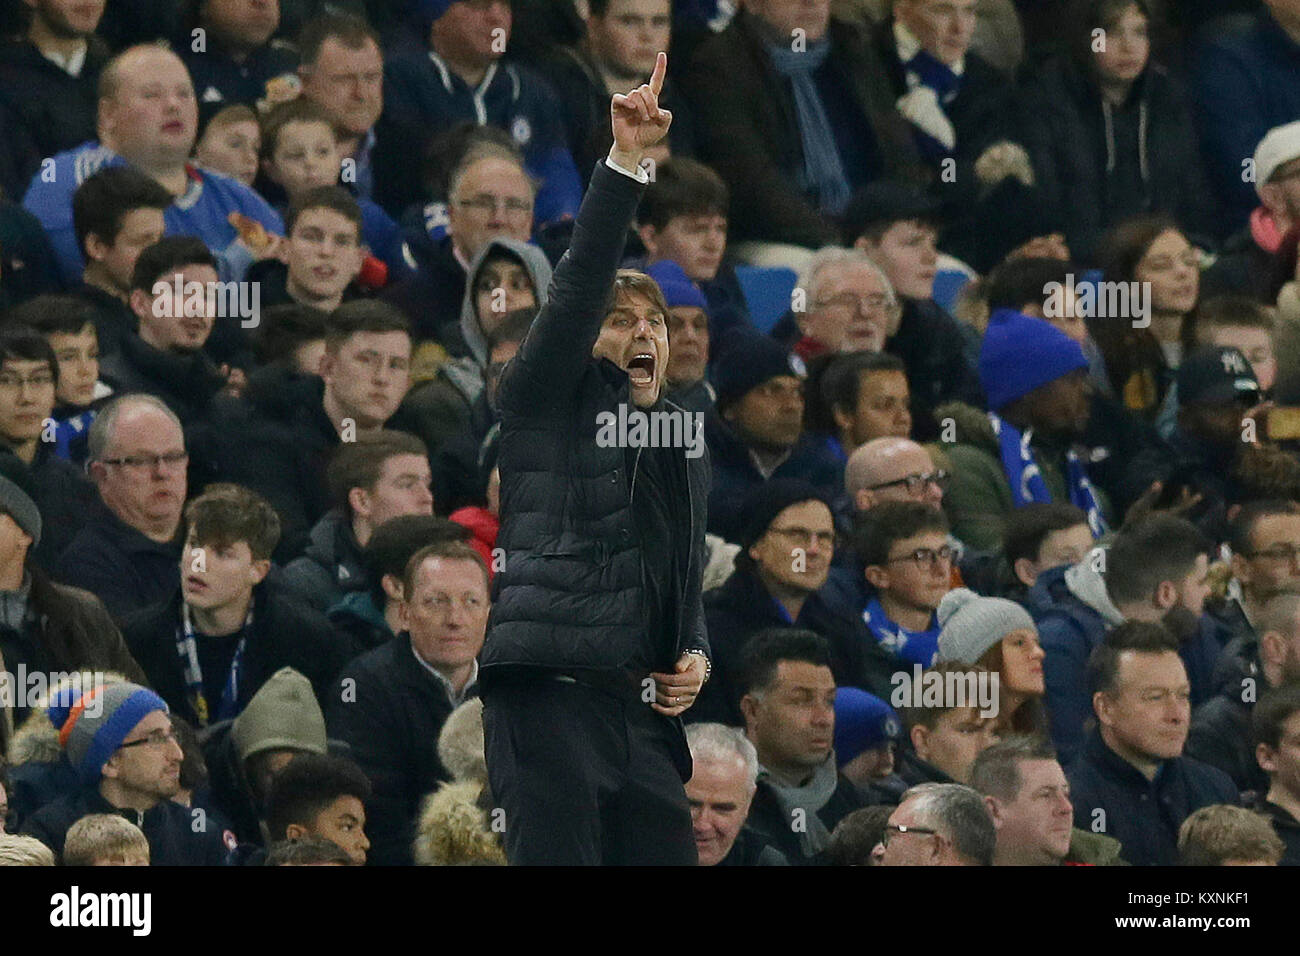 London, UK. 10th Jan, 2018. Chelsea's manager Antonio Conte shouts across the pitch during the English League Cup semi-final 1st leg match between Chelsea and Arsenal at Stamford Bridge Stadium in London, Britain on Jan. 10, 2018. Chelsea and Arsenal drew 0-0. Credit: Tim Ireland/Xinhua/Alamy Live News Stock Photo